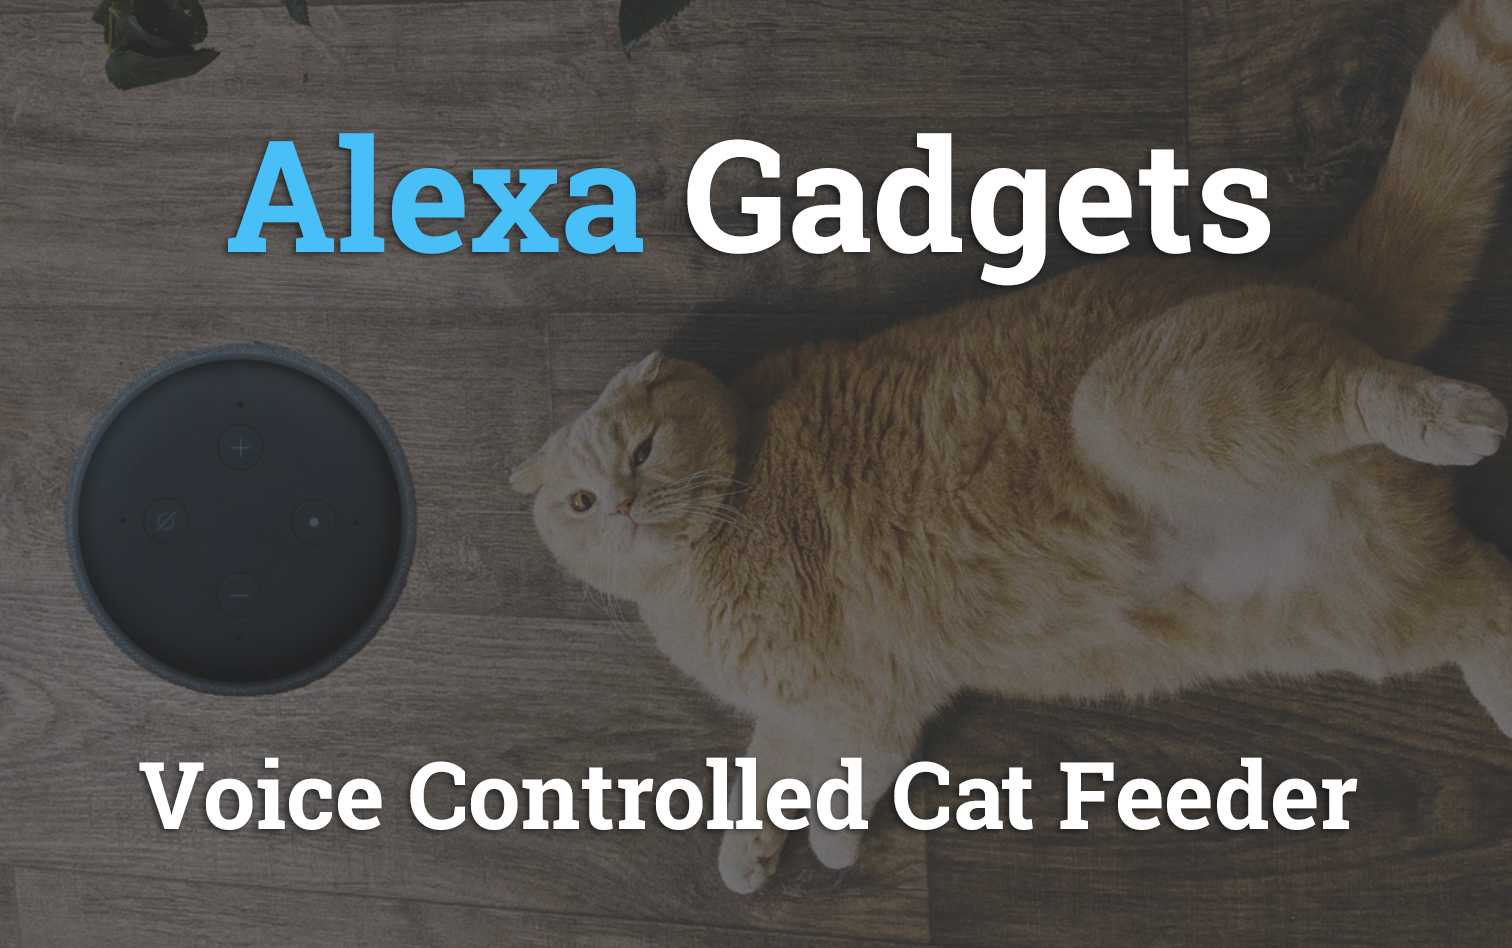 Alexa Gadgets Introduction - Voice Controlled Cat Feeder